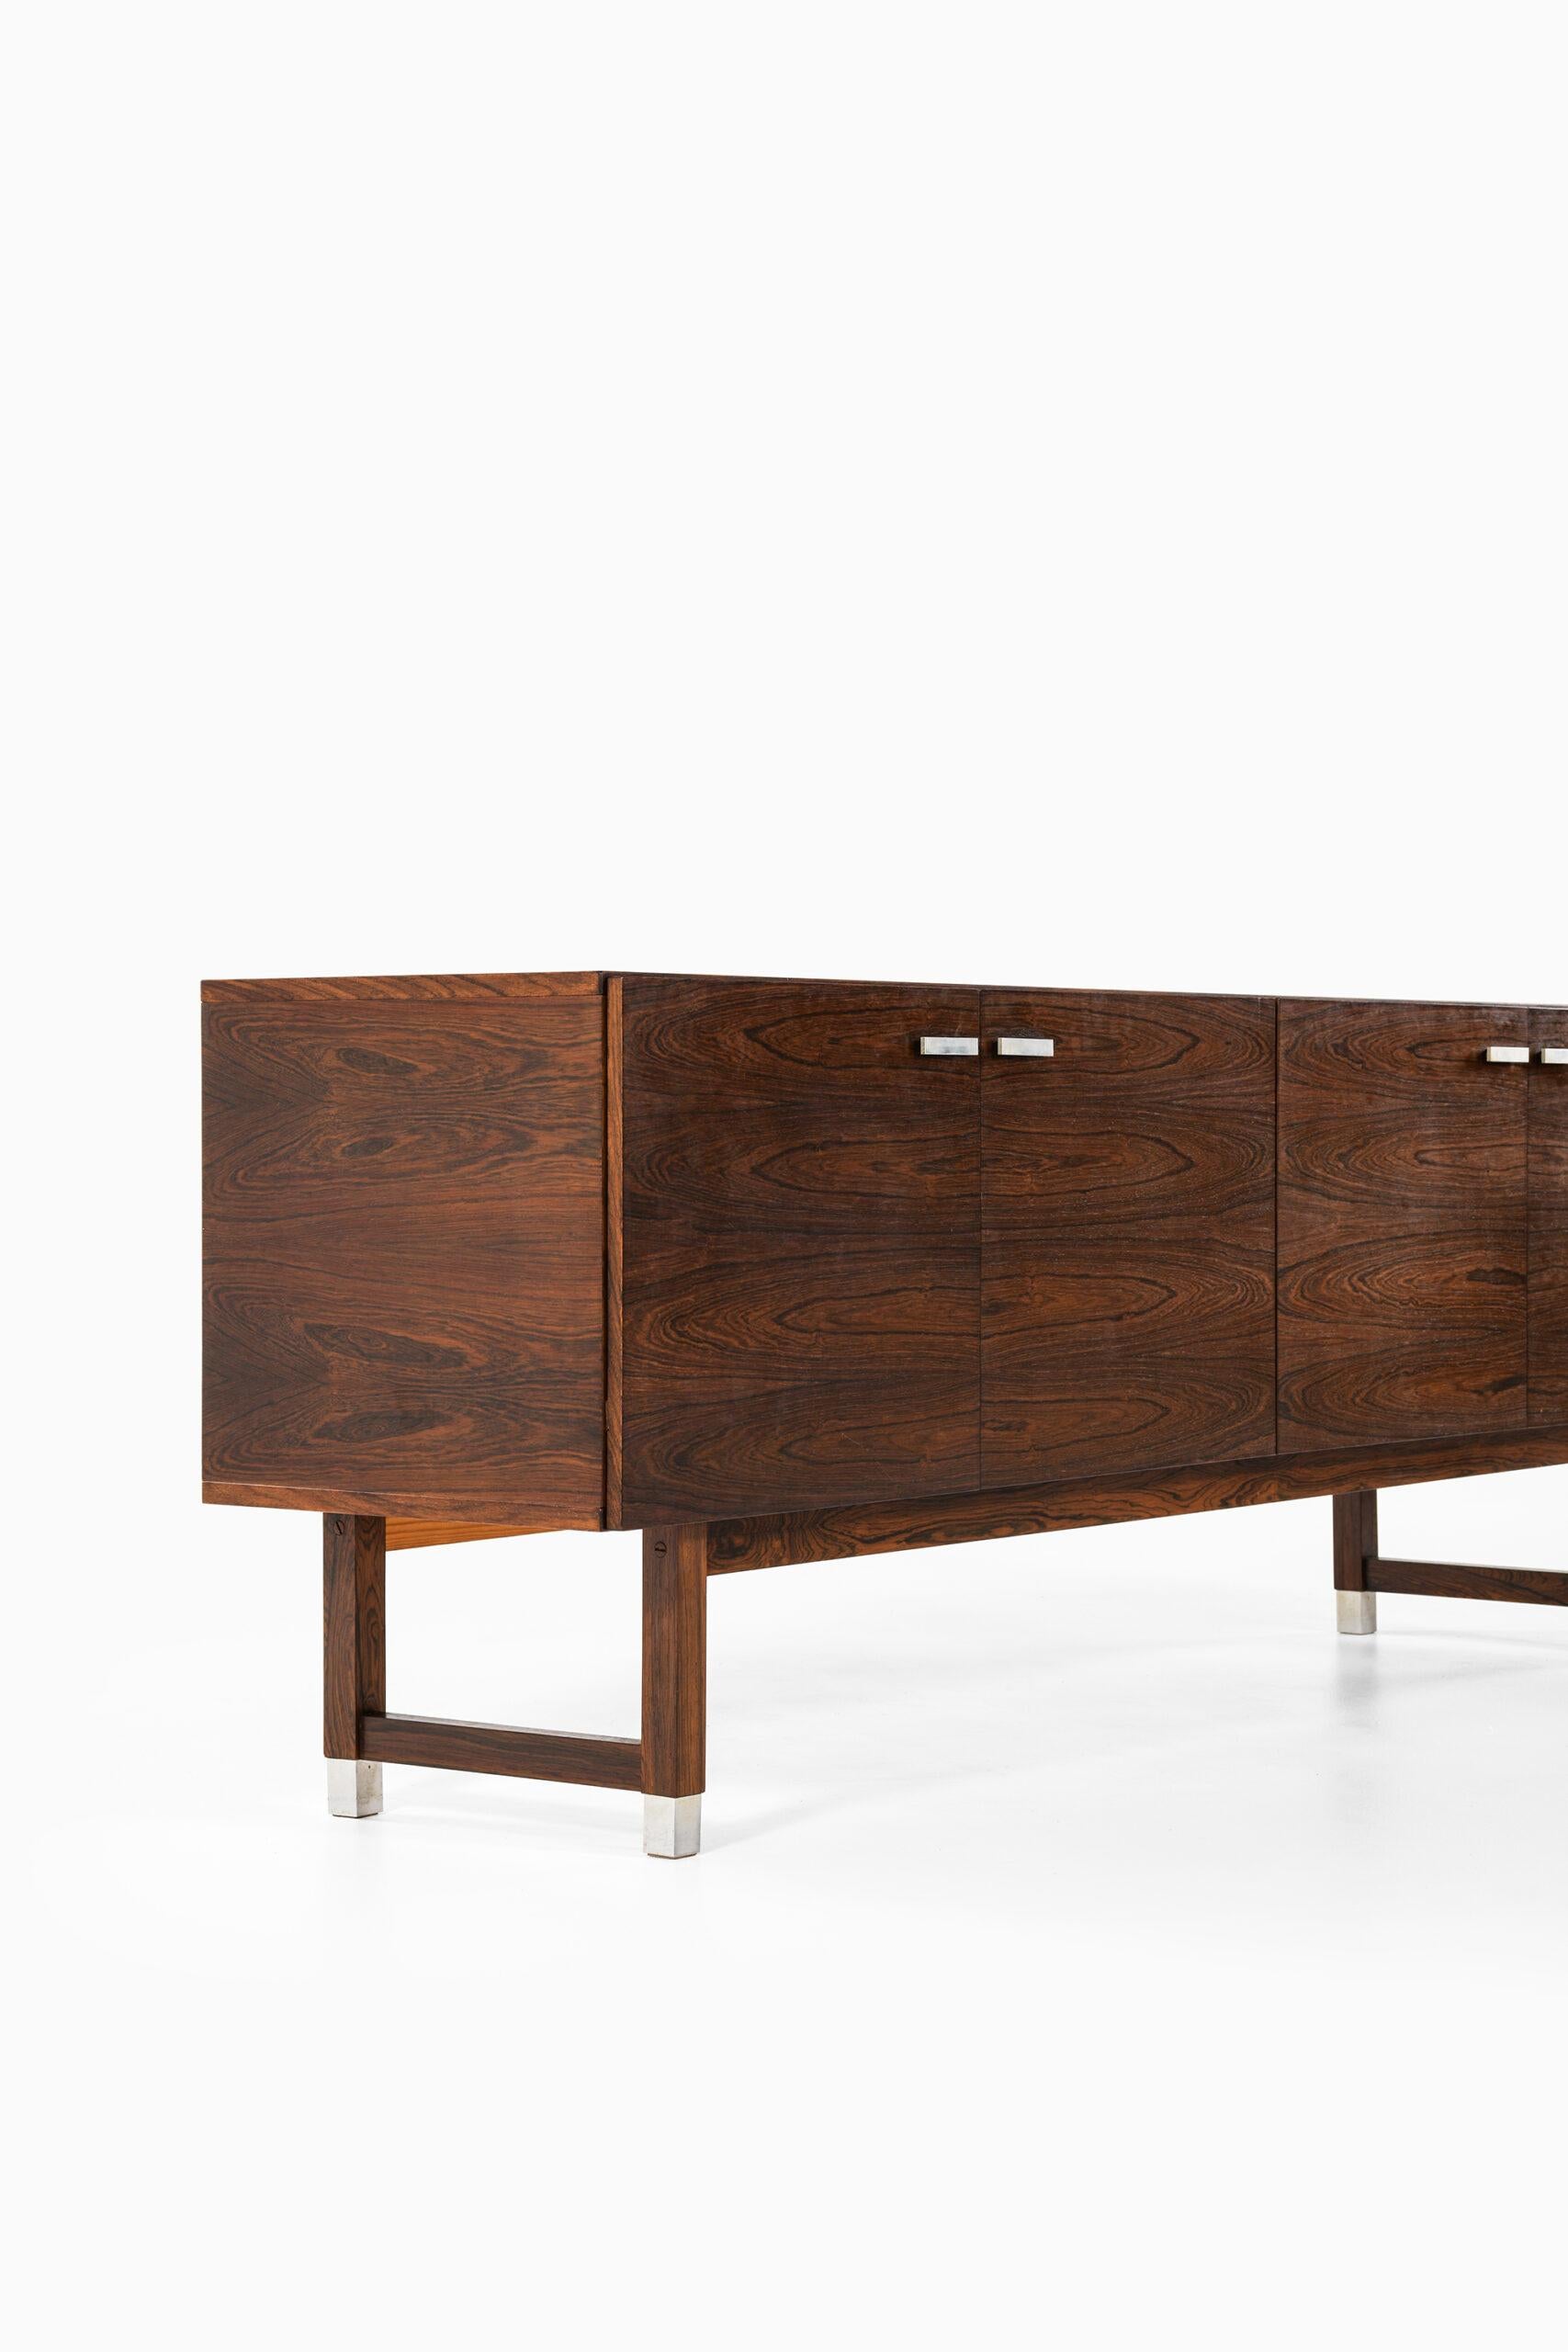 Kai Kristiansen Sideboard Produced by PSA Furniture in Denmark For Sale 2